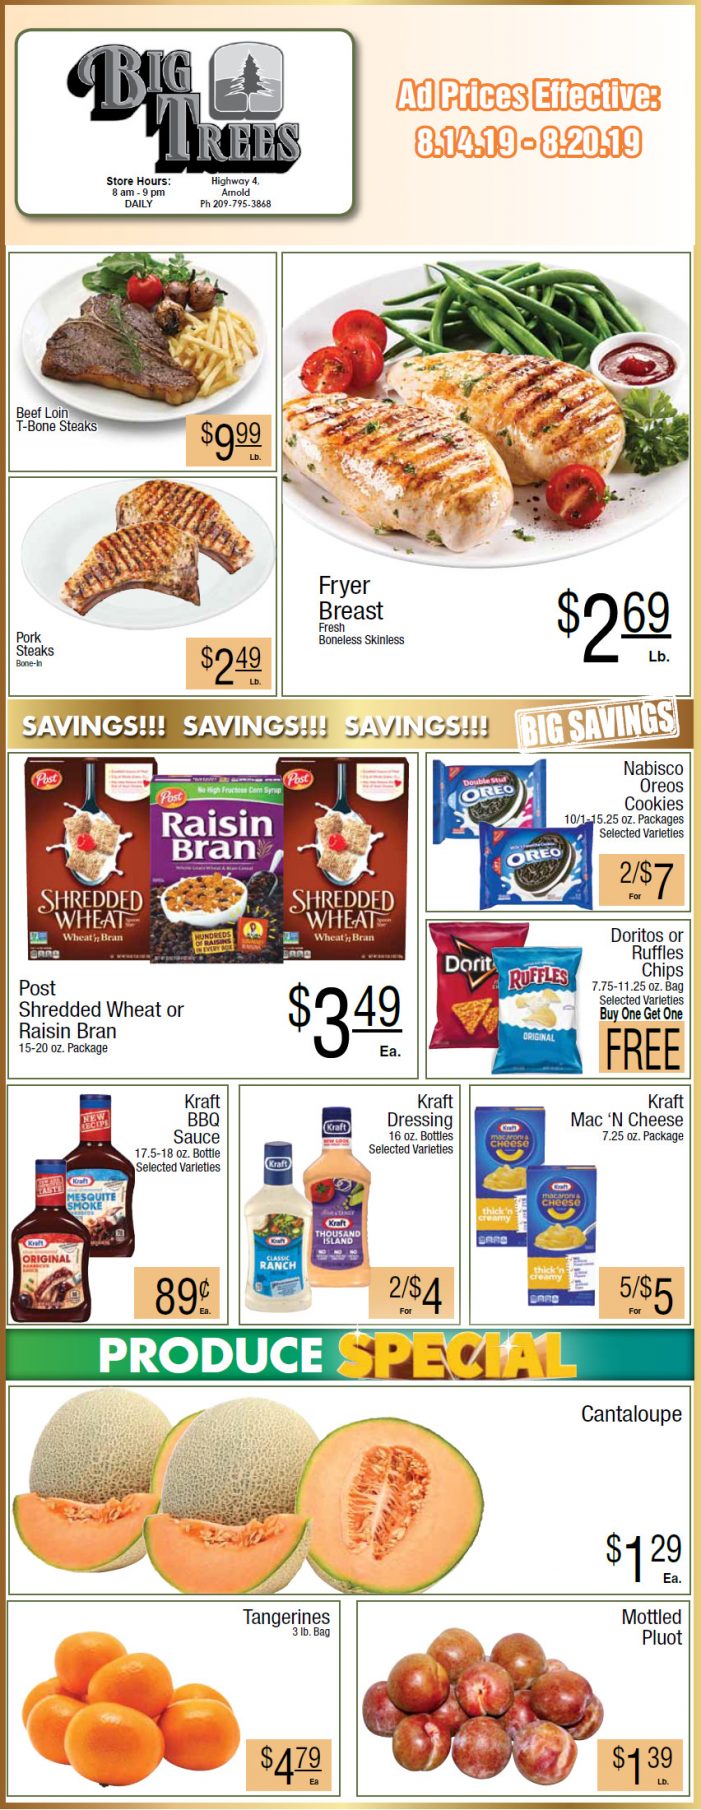 Big Trees Market Weekly Ad & Grocery Specials Through August 20